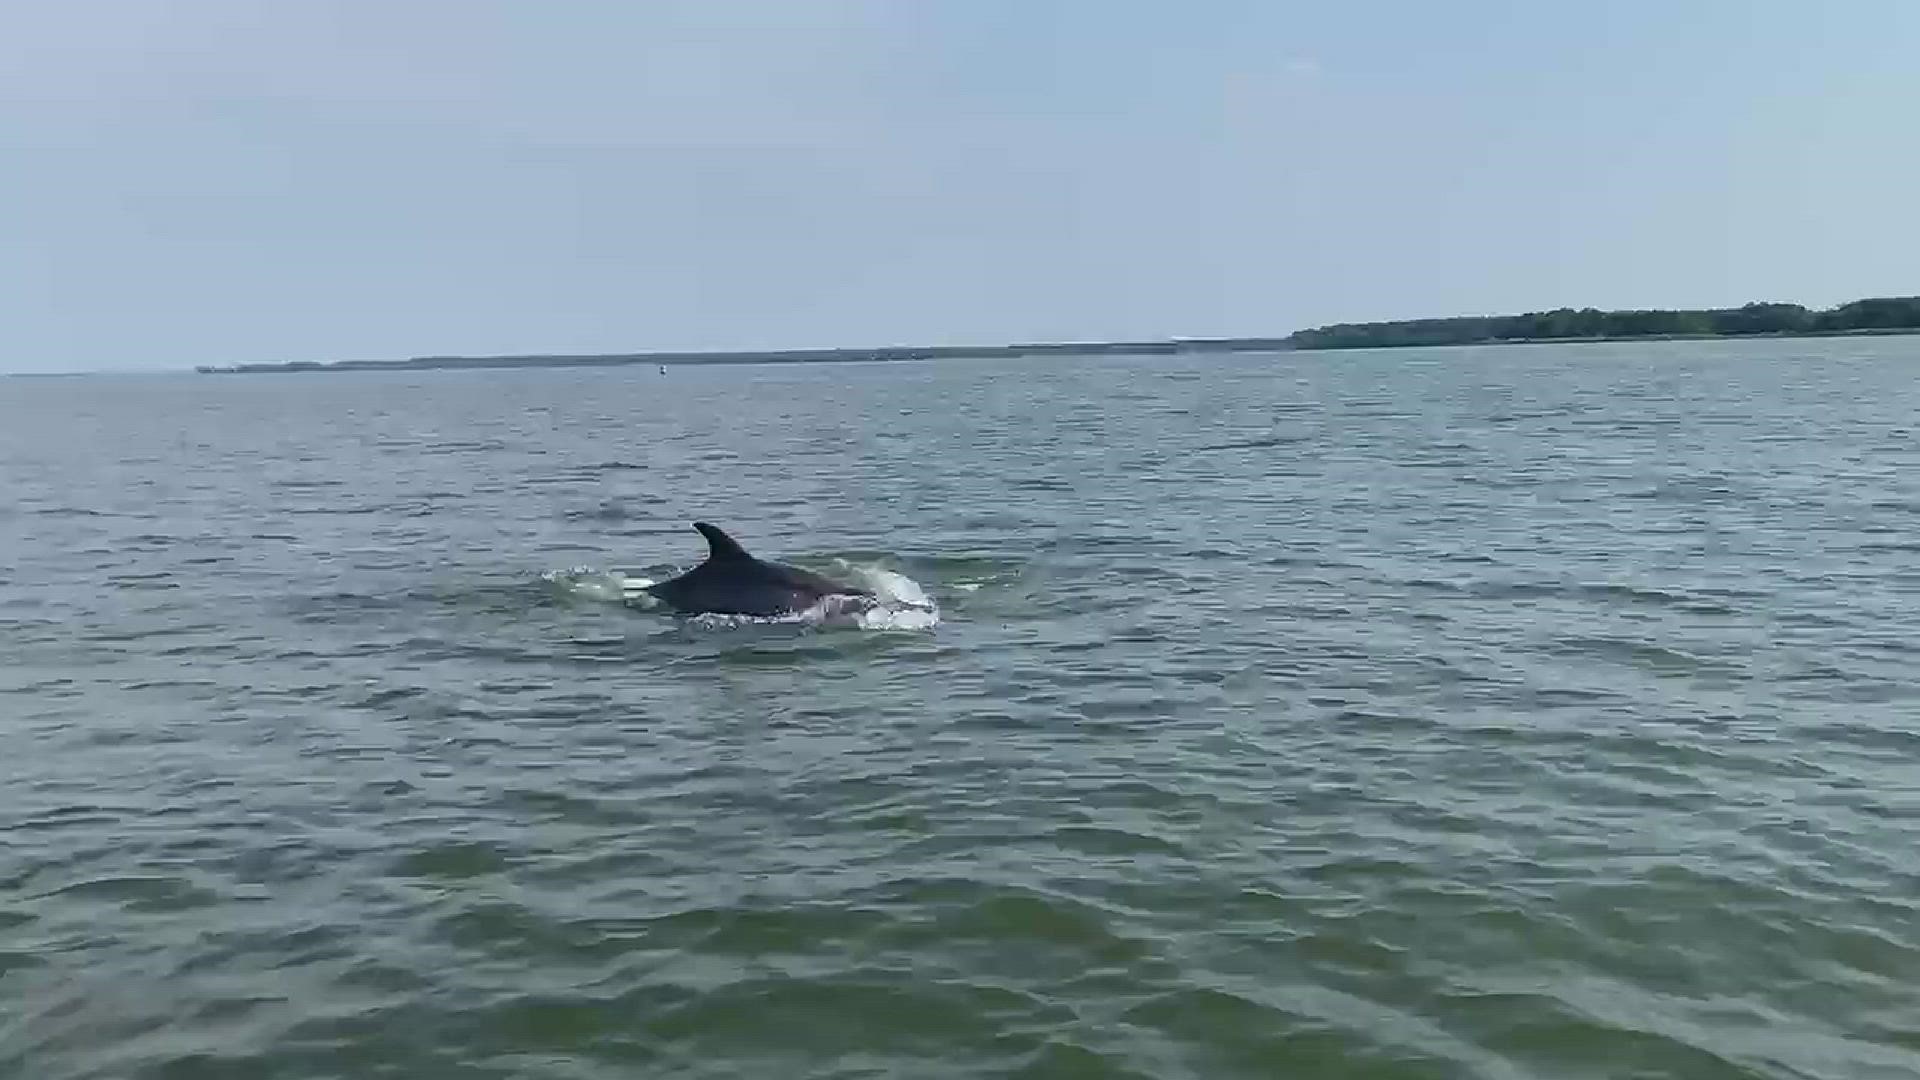 The video from Maryland DNR shows multiple dolphins in the Chesapeake Bay tributary Choptank River.